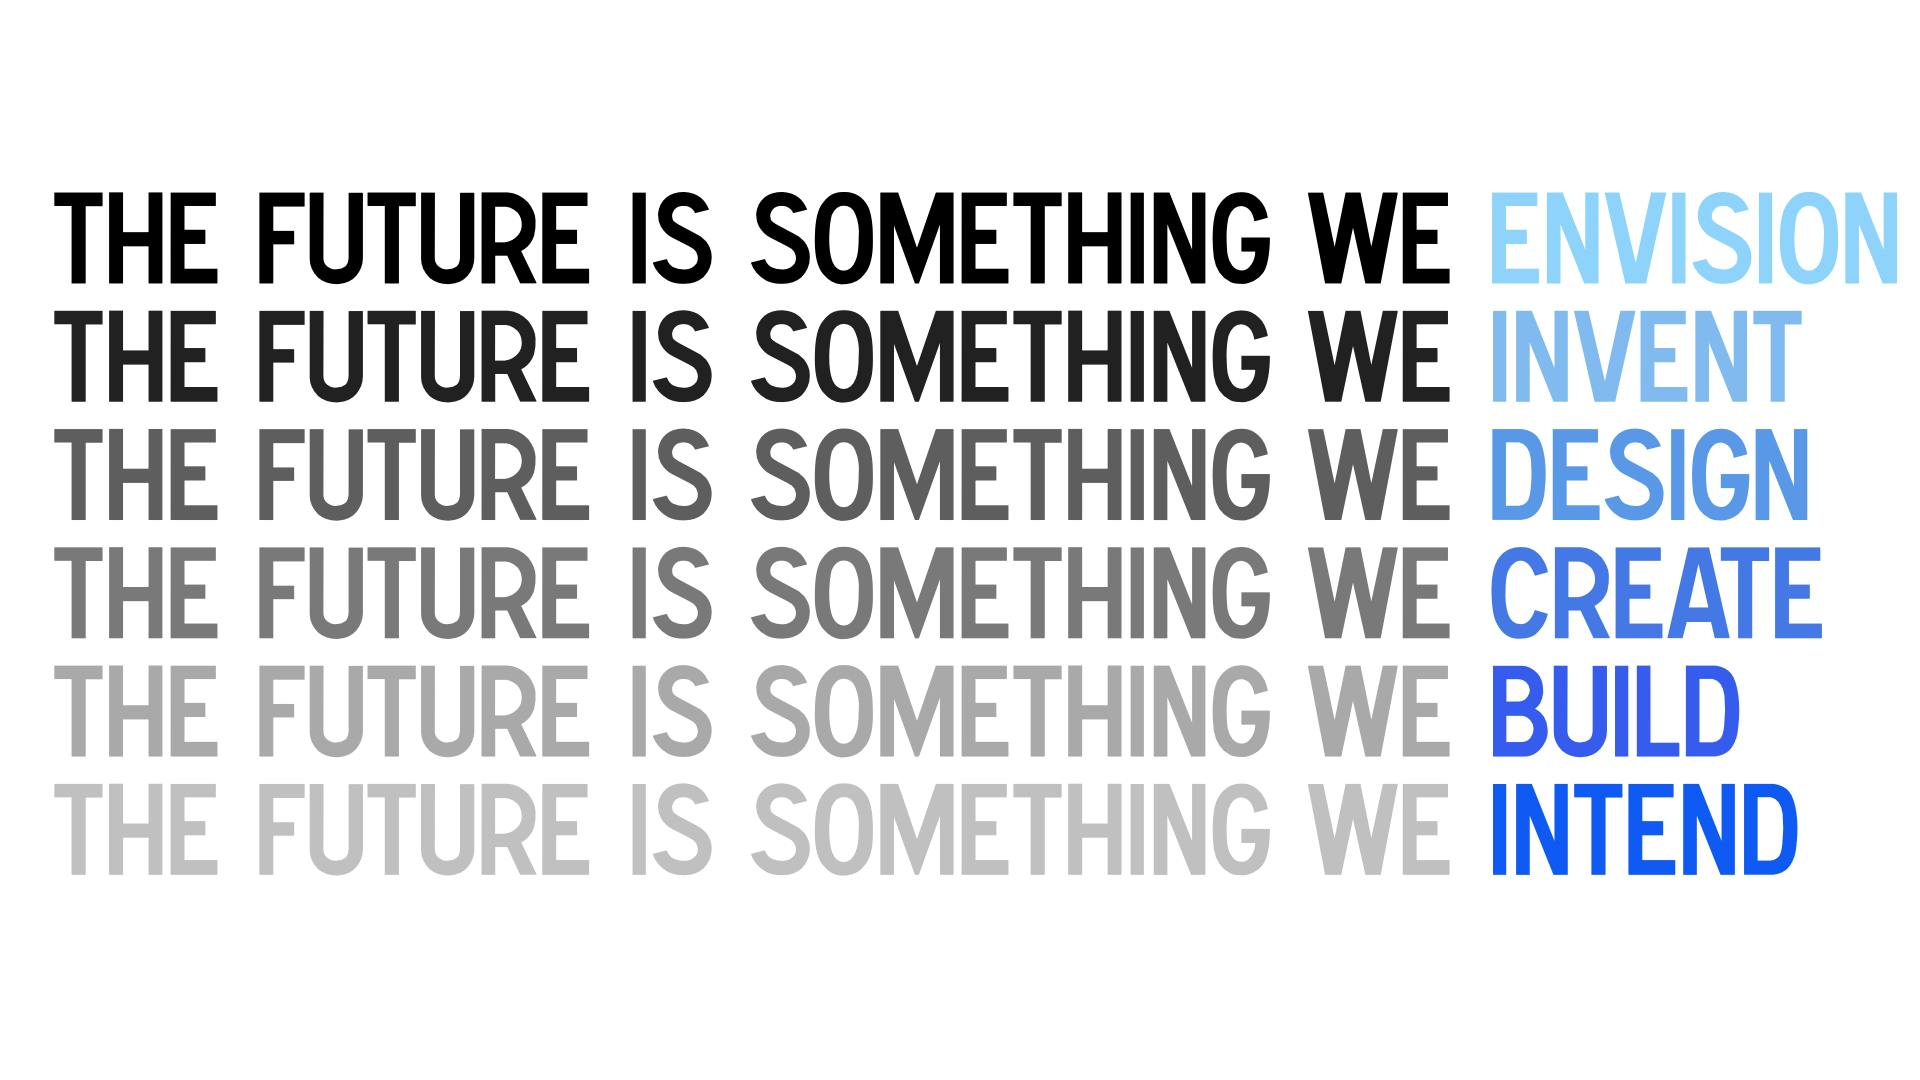 Picture with different titles: The future is something we envision, invent, design, create, build, intend